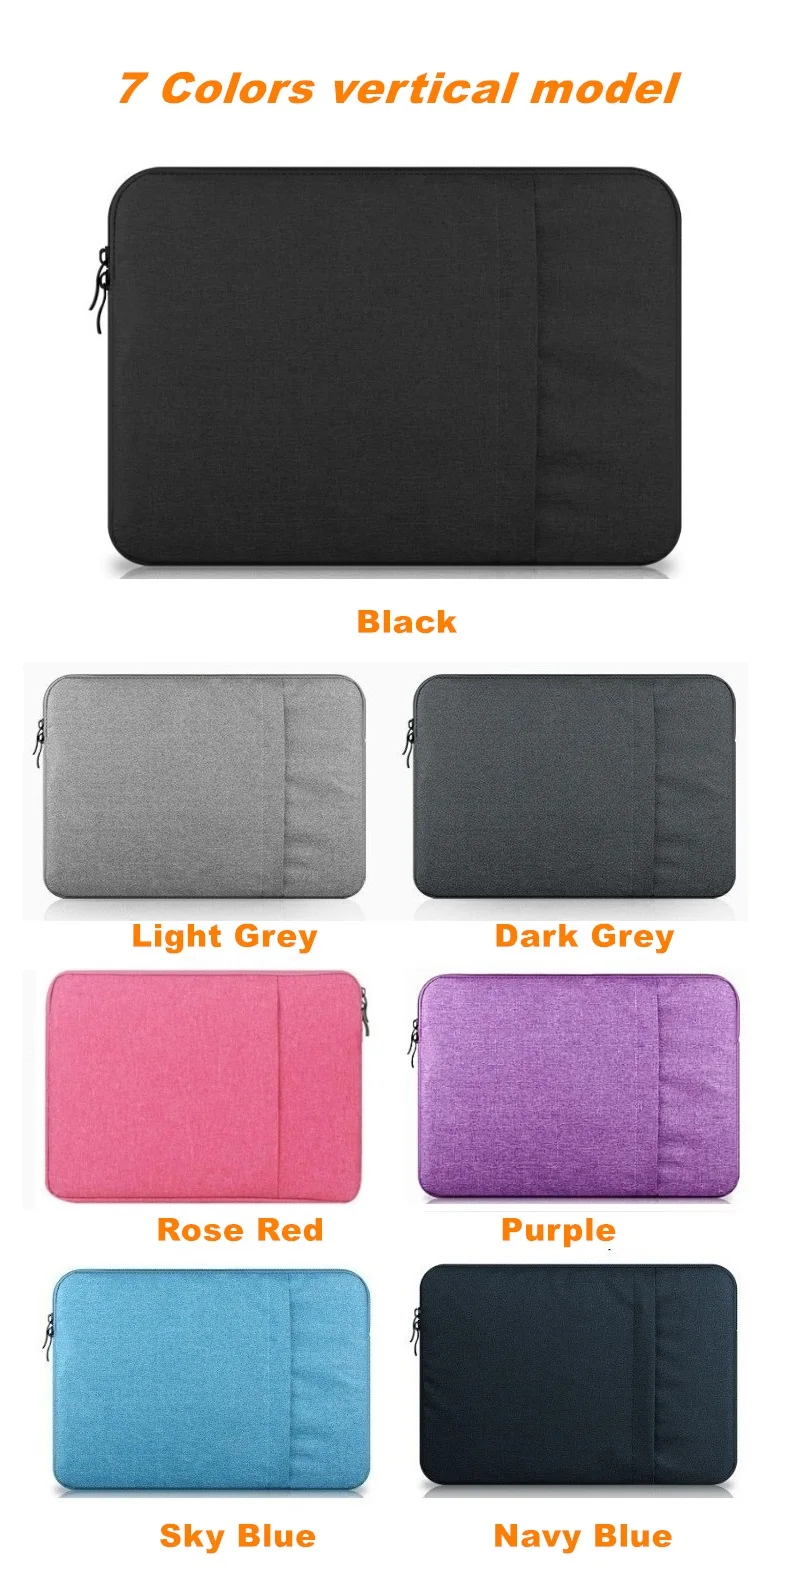 Anki Brand Waterproof Laptop Bag 11,12,13,14,15.6 Inch,Man Lady Shockproof Sleeve Case For Macbook Air Pro Notebook PC,DropShip images - 6